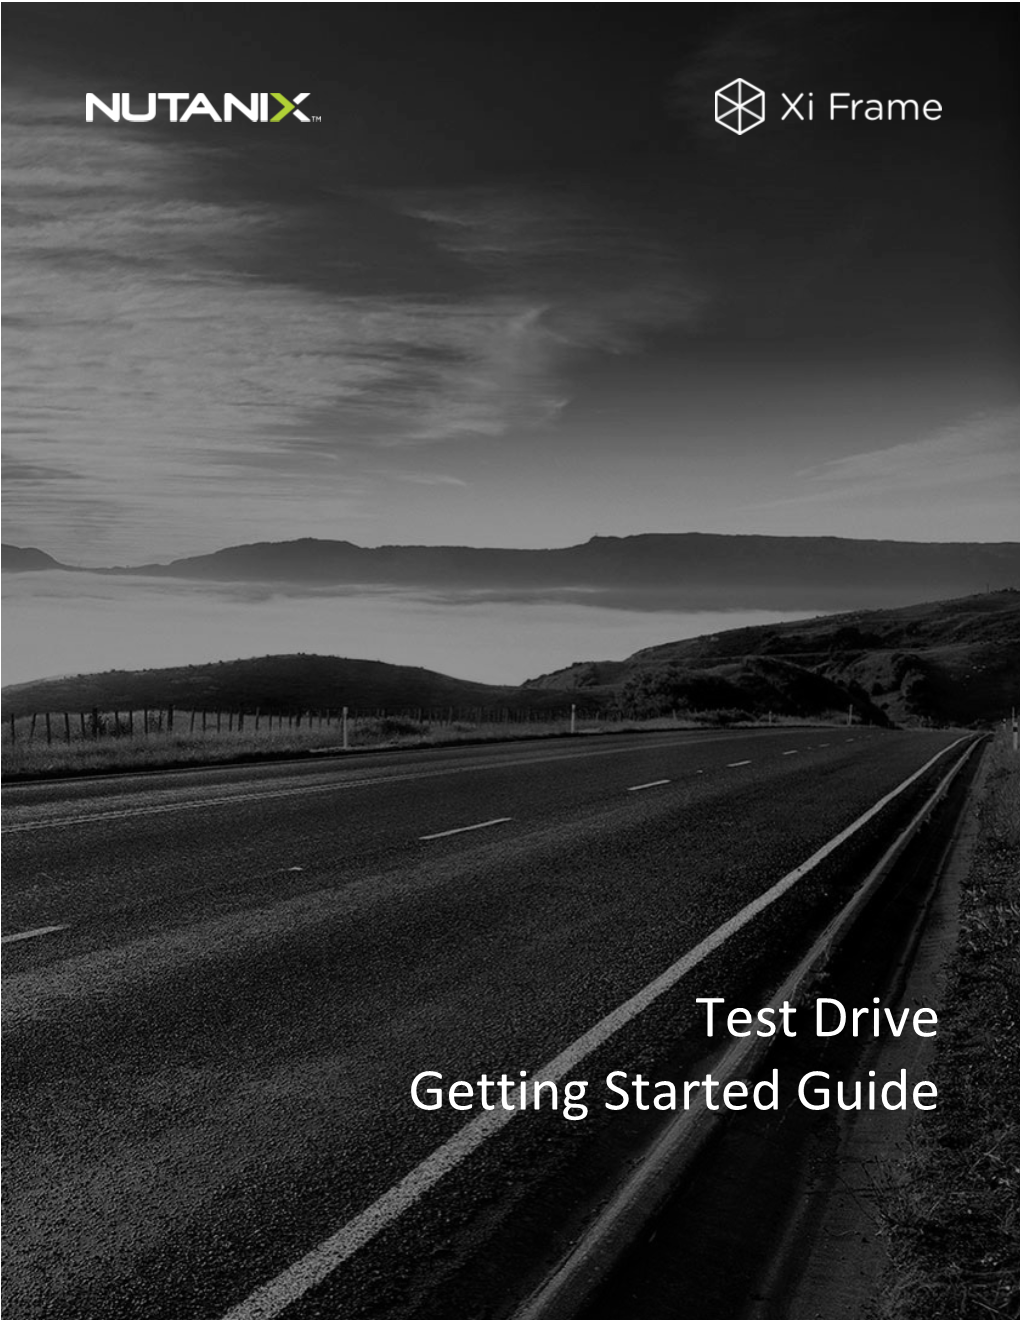 Test Drive Getting Started Guide